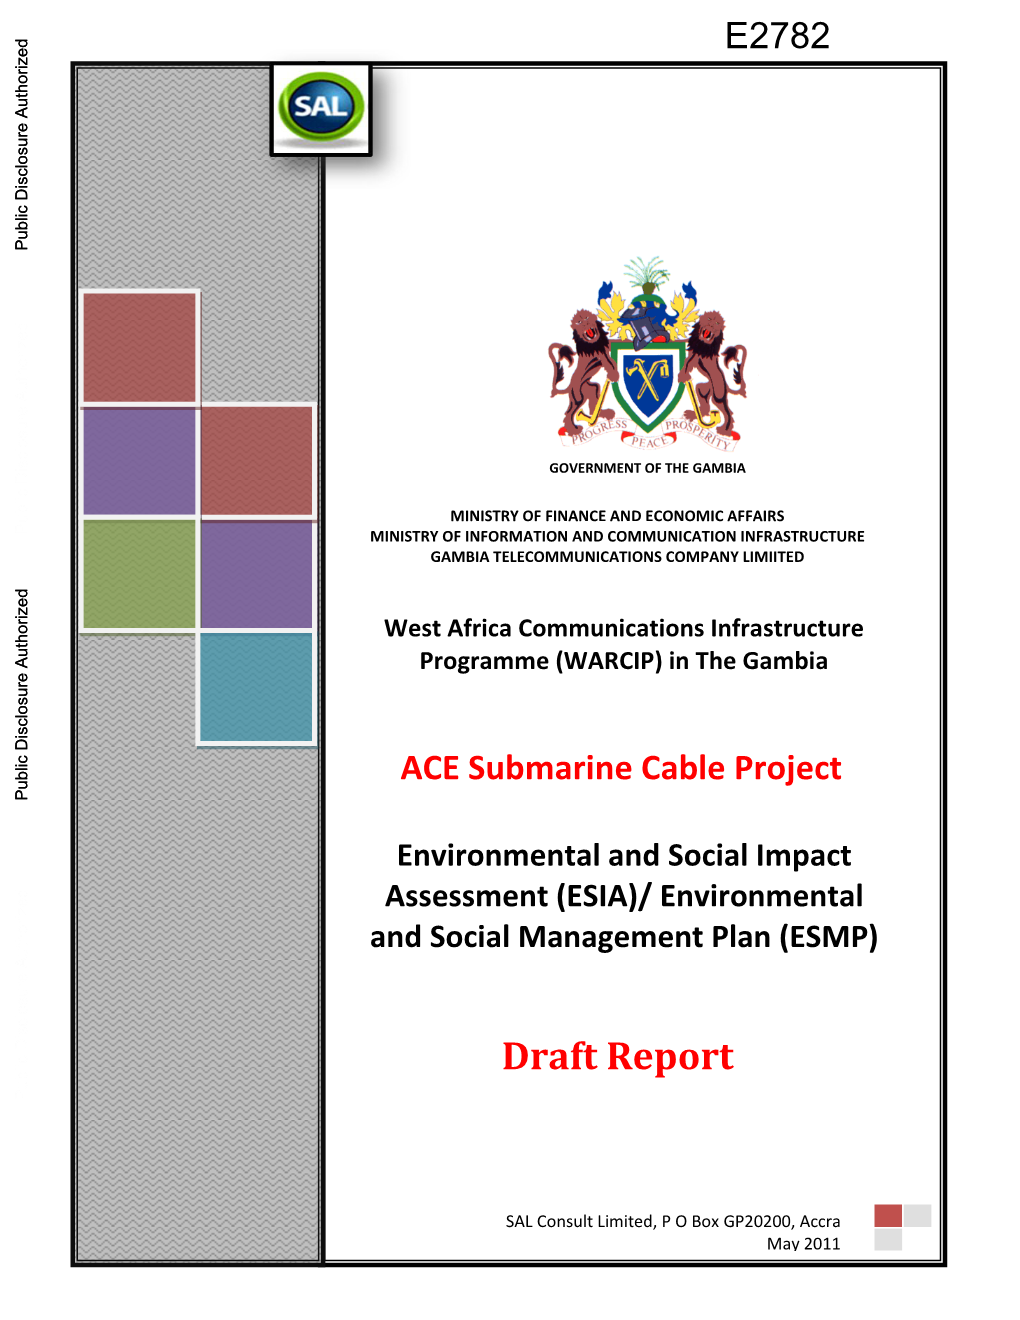 In the Gambia ACE Submarine Cable Project Environmental and Social Impact Assessment